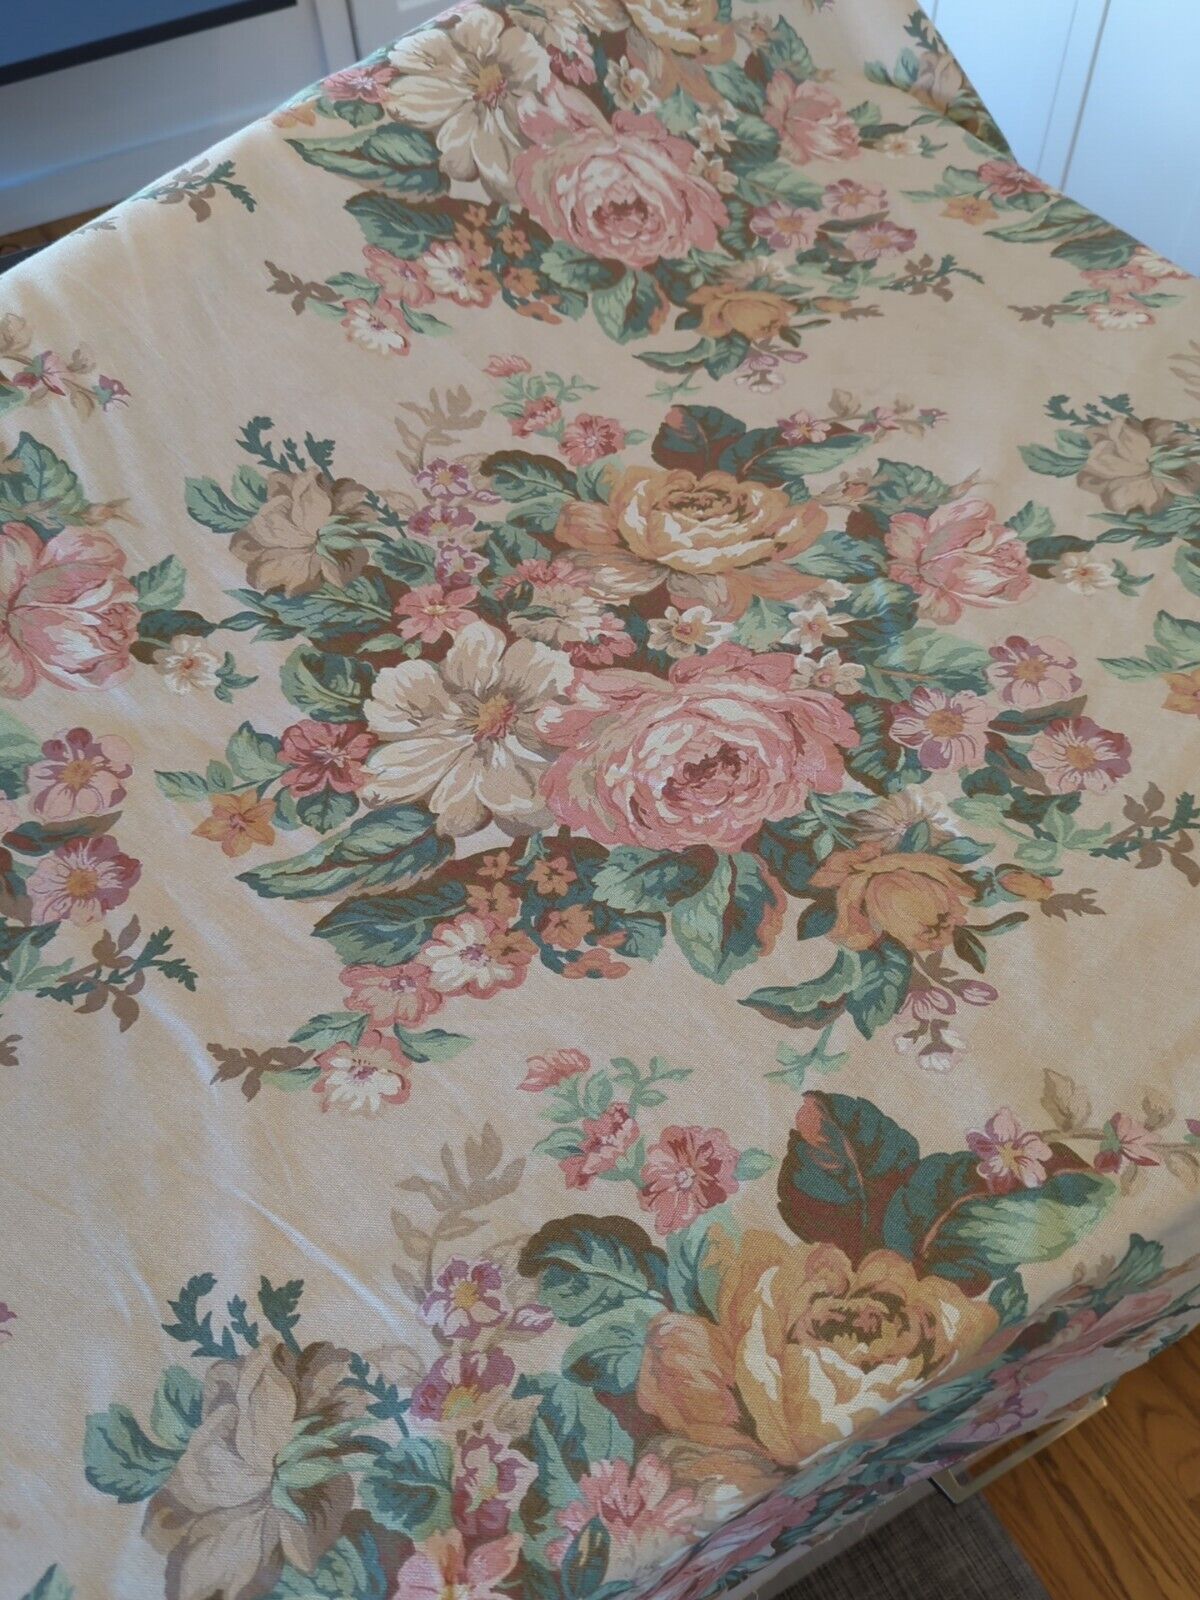 1991 Vintage Fabric Upholstery Fabric by Stanley King Shabby Chic Roses 25 Yards